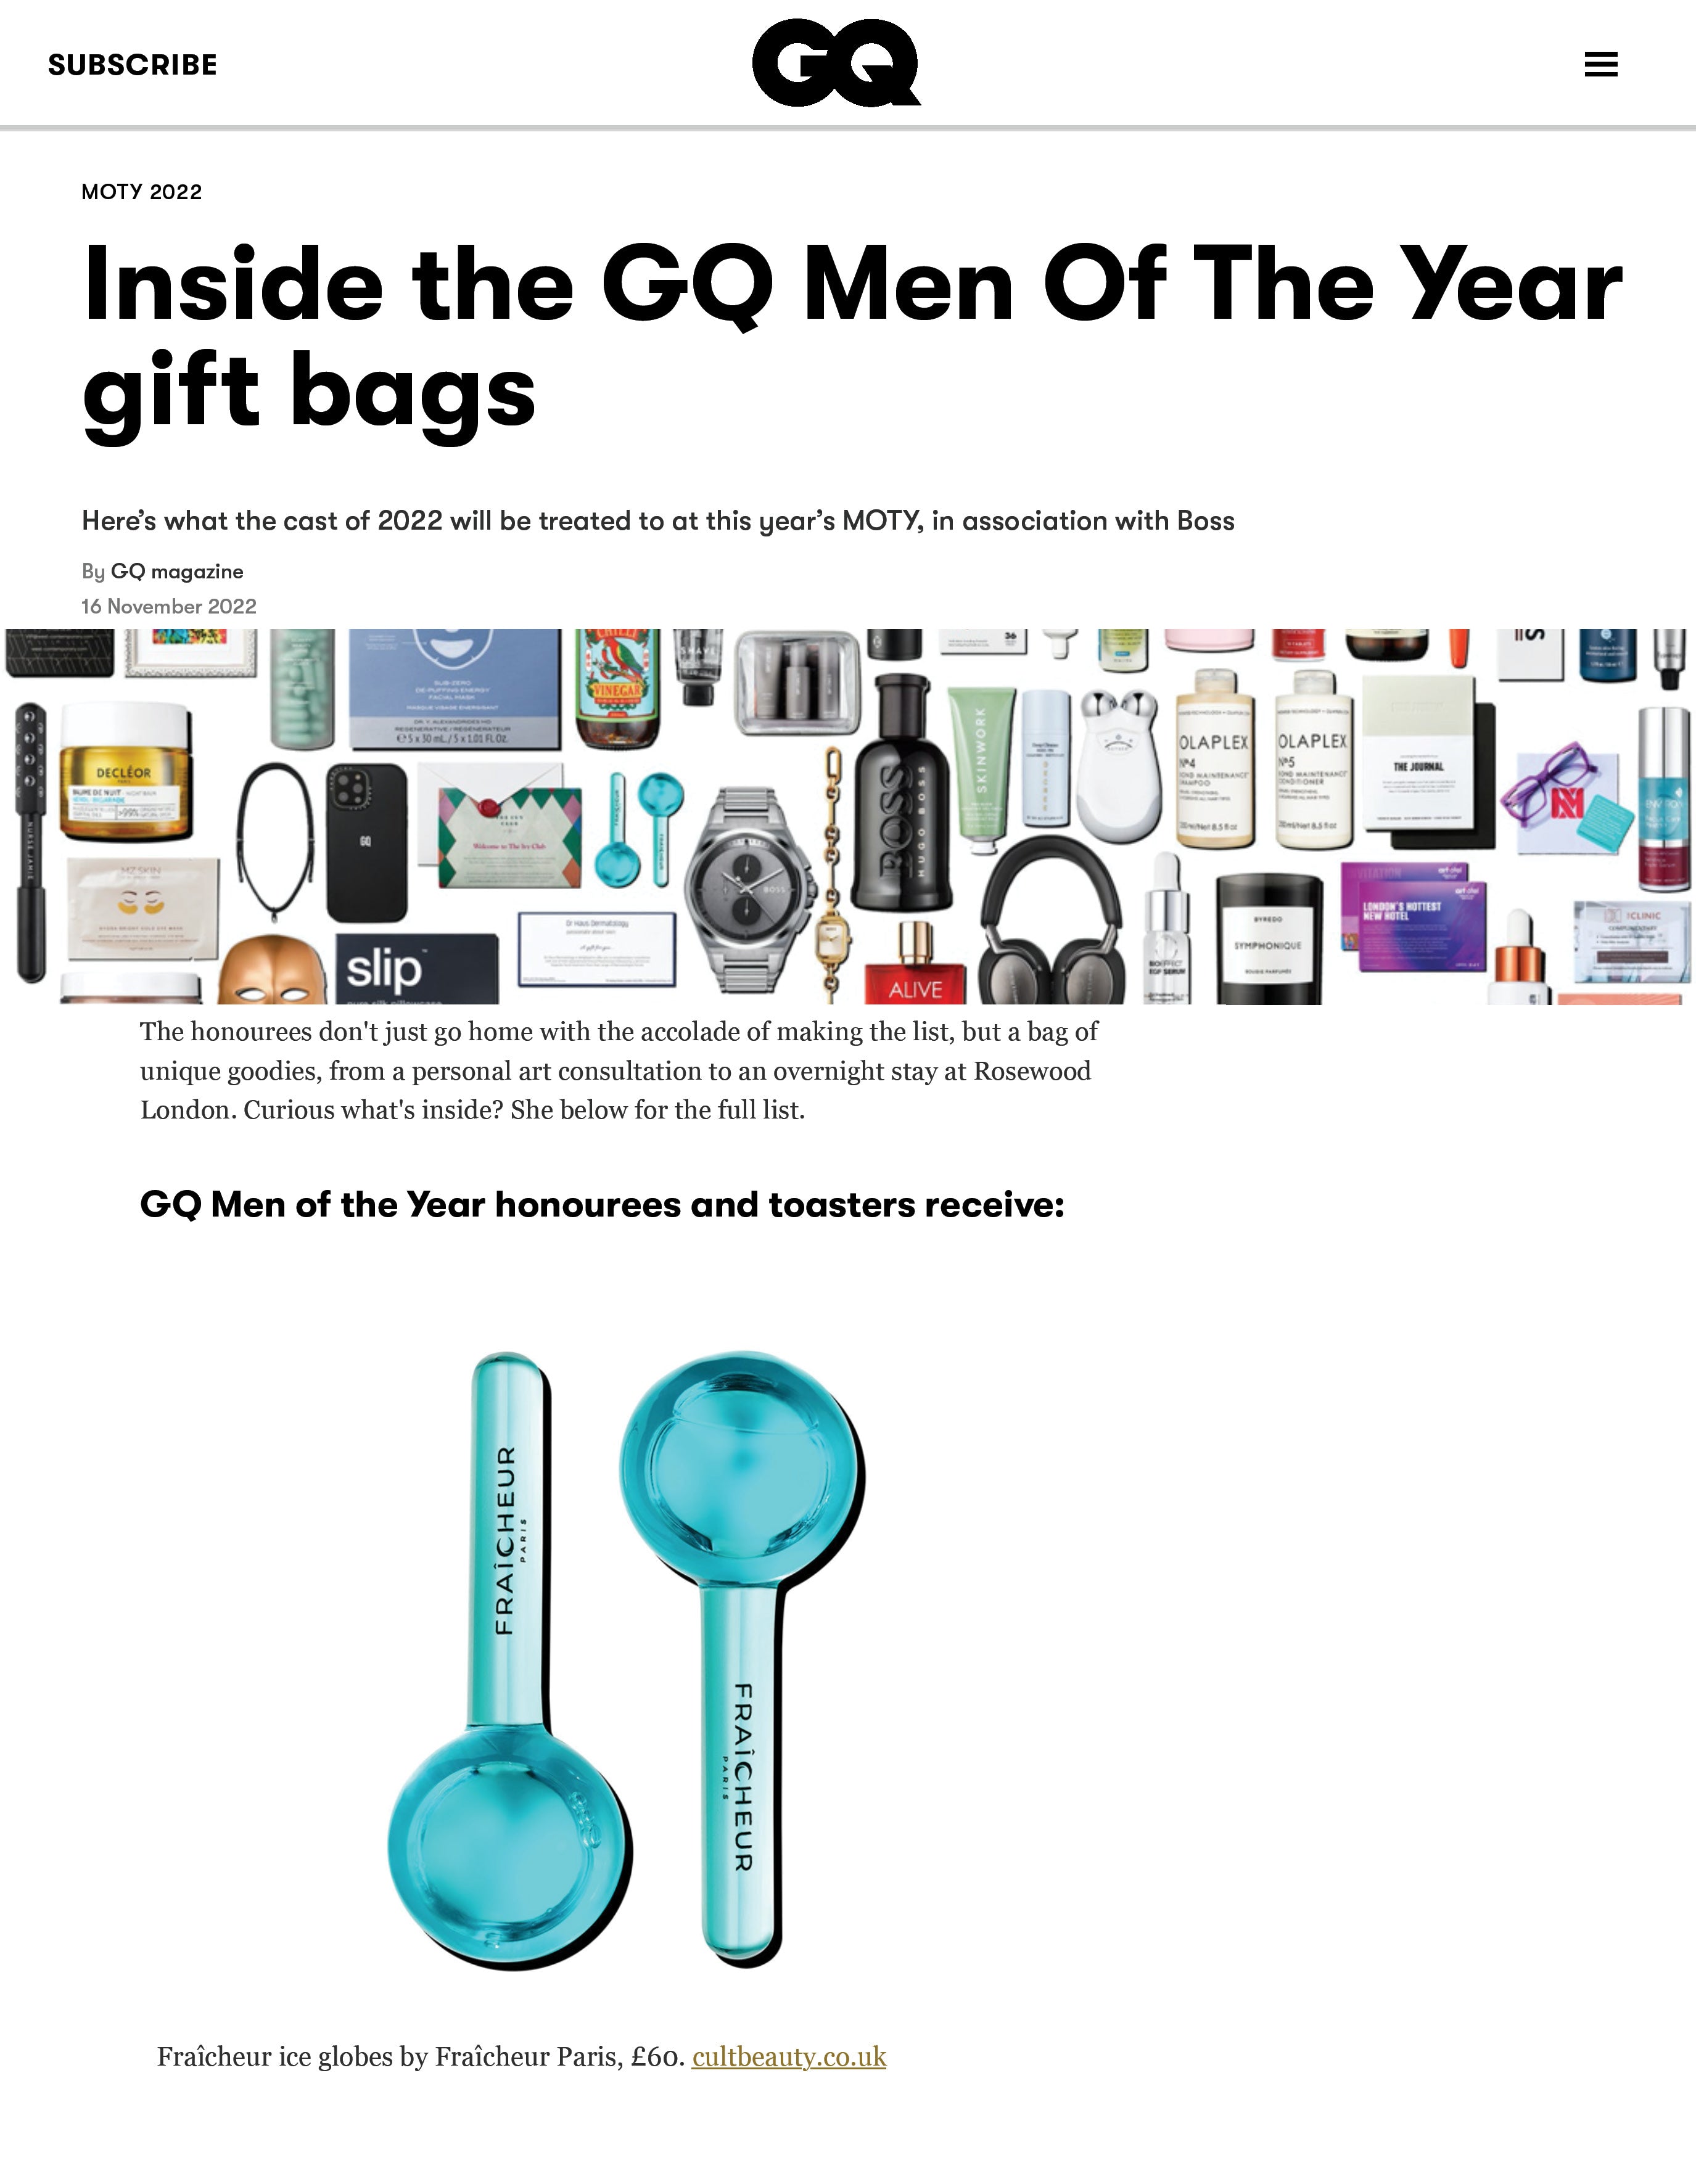 Fraîcheur Ice Globes were included in the gift bags that honourees and VIP guests received at the 2022 British GQ Men Of The Year awards